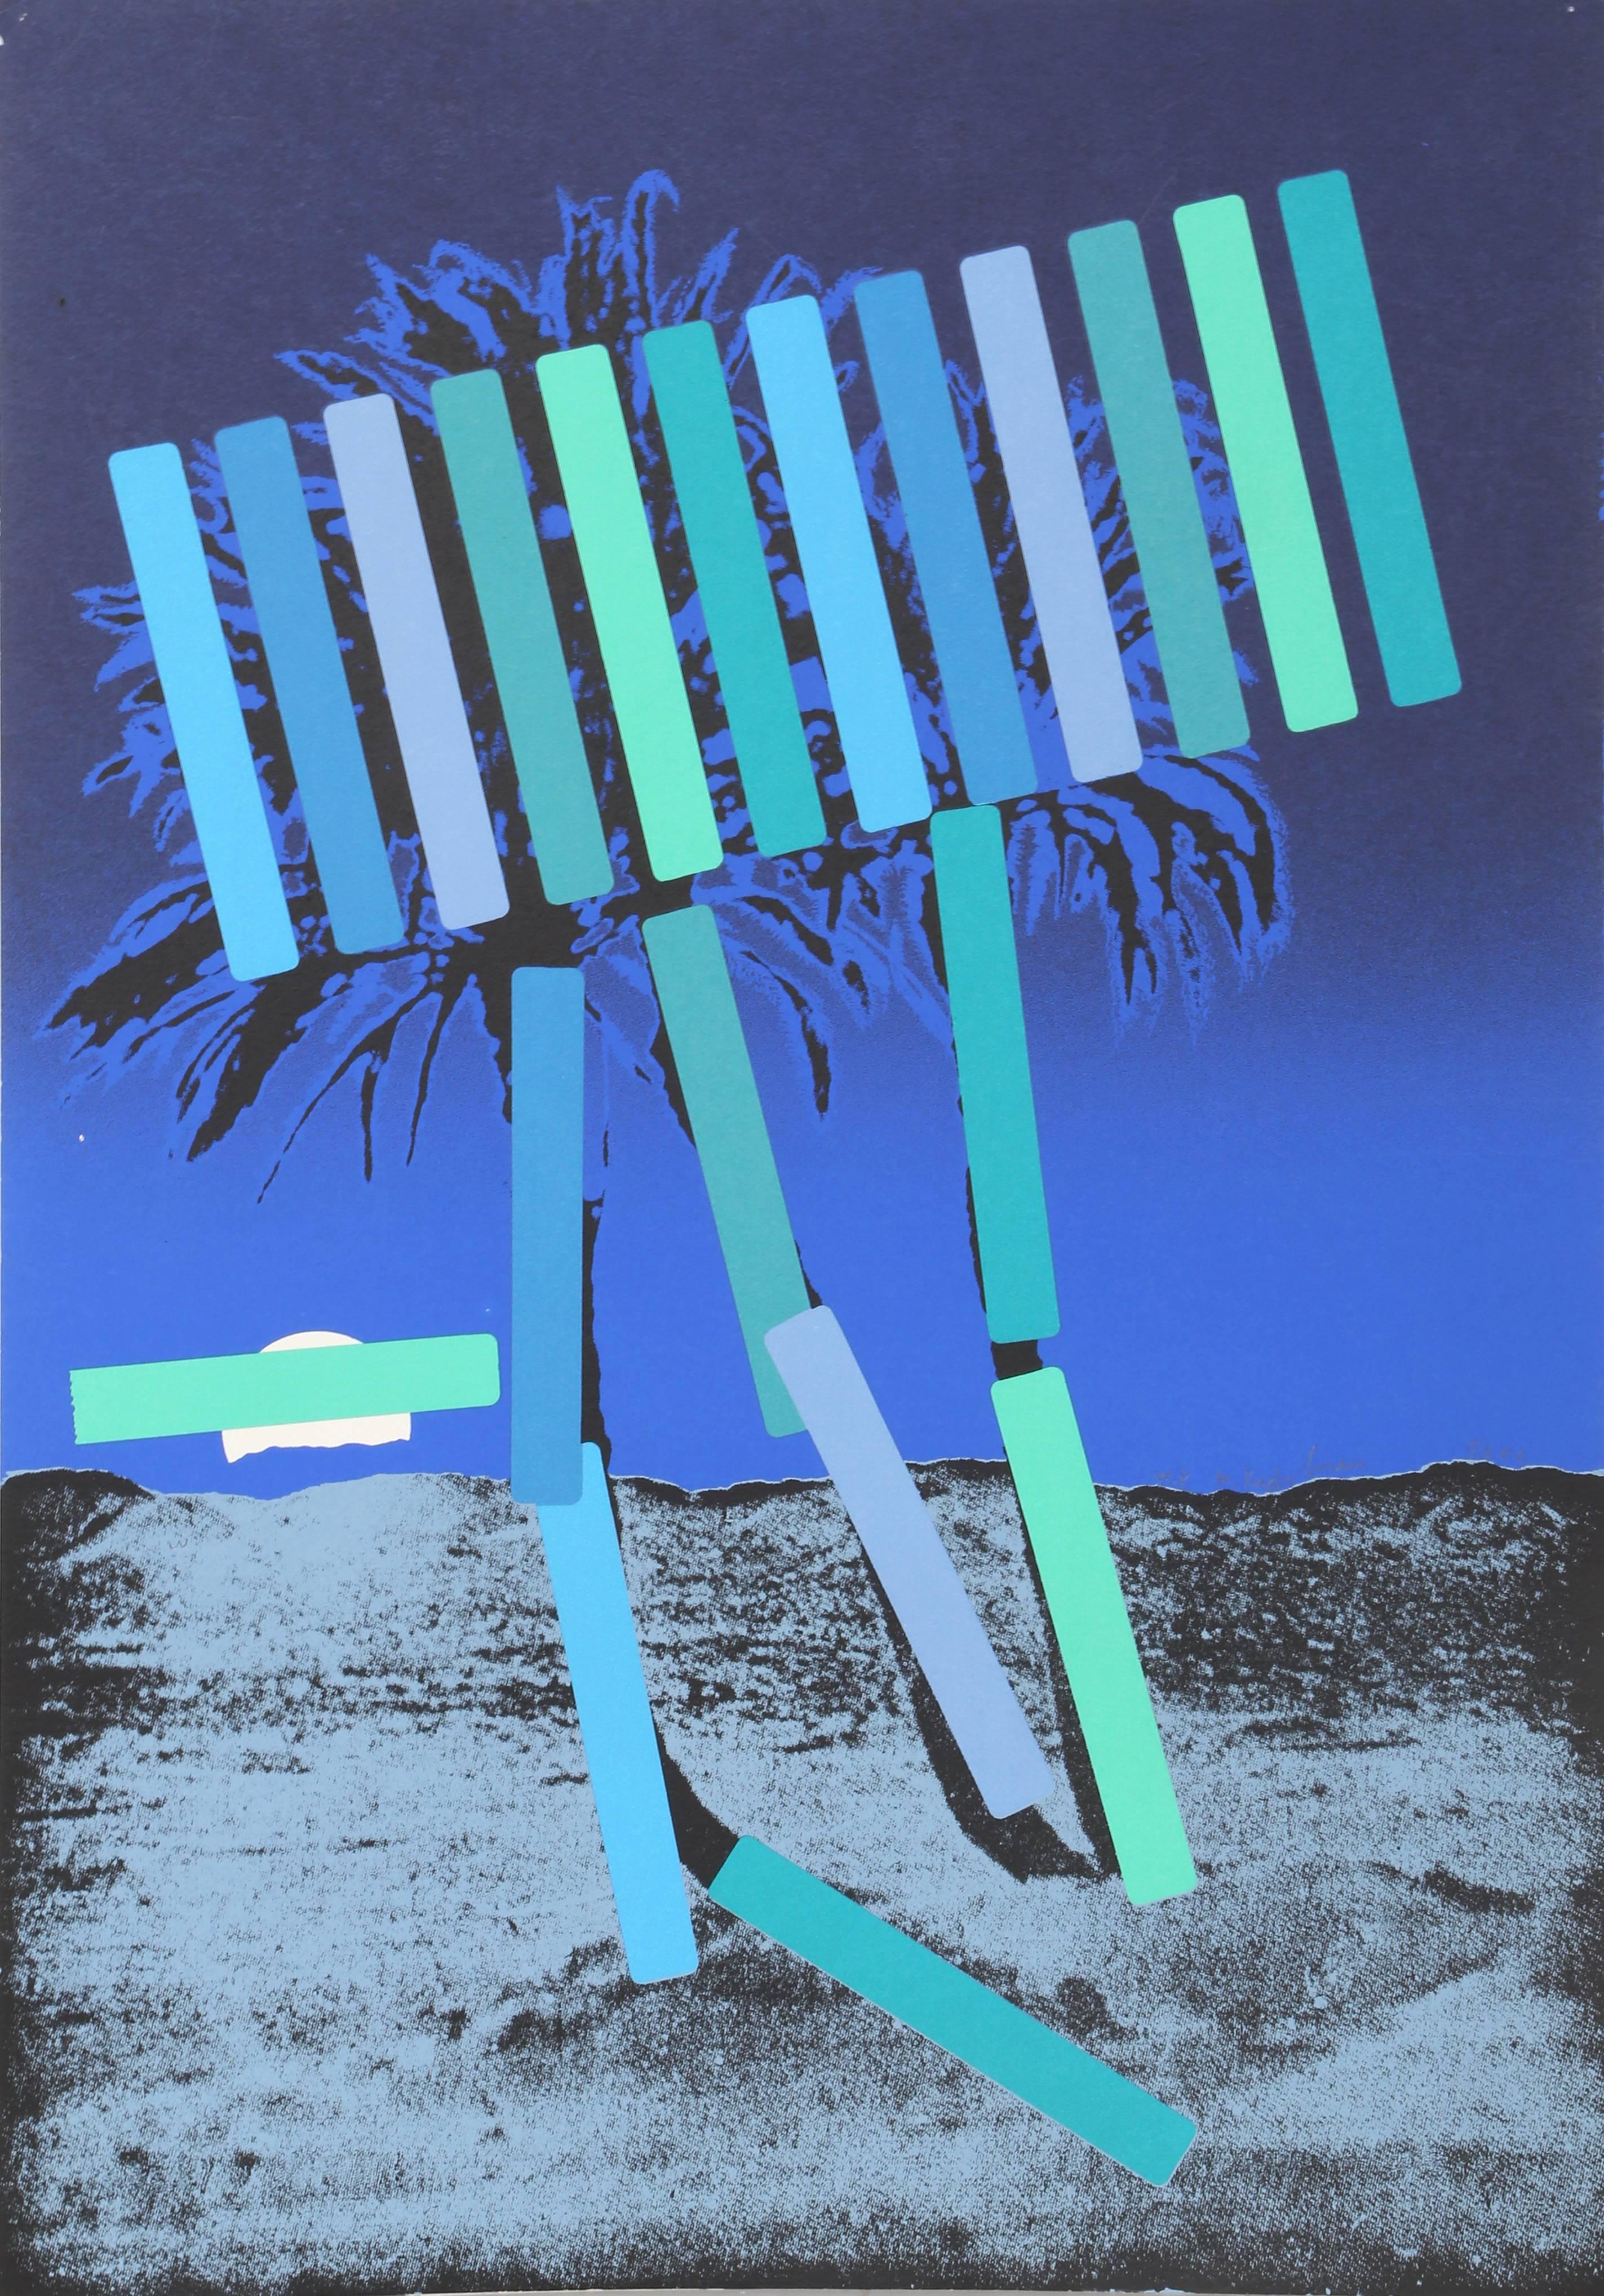 Artist: Menashe Kadishman, Israeli (1932 – 2015)
Title: Blue Palm
Year: 1979
Medium: Serigraph, signed in pencil
Edition: WP (Working Proof)
Size: 30.5 x 21.5 inches

